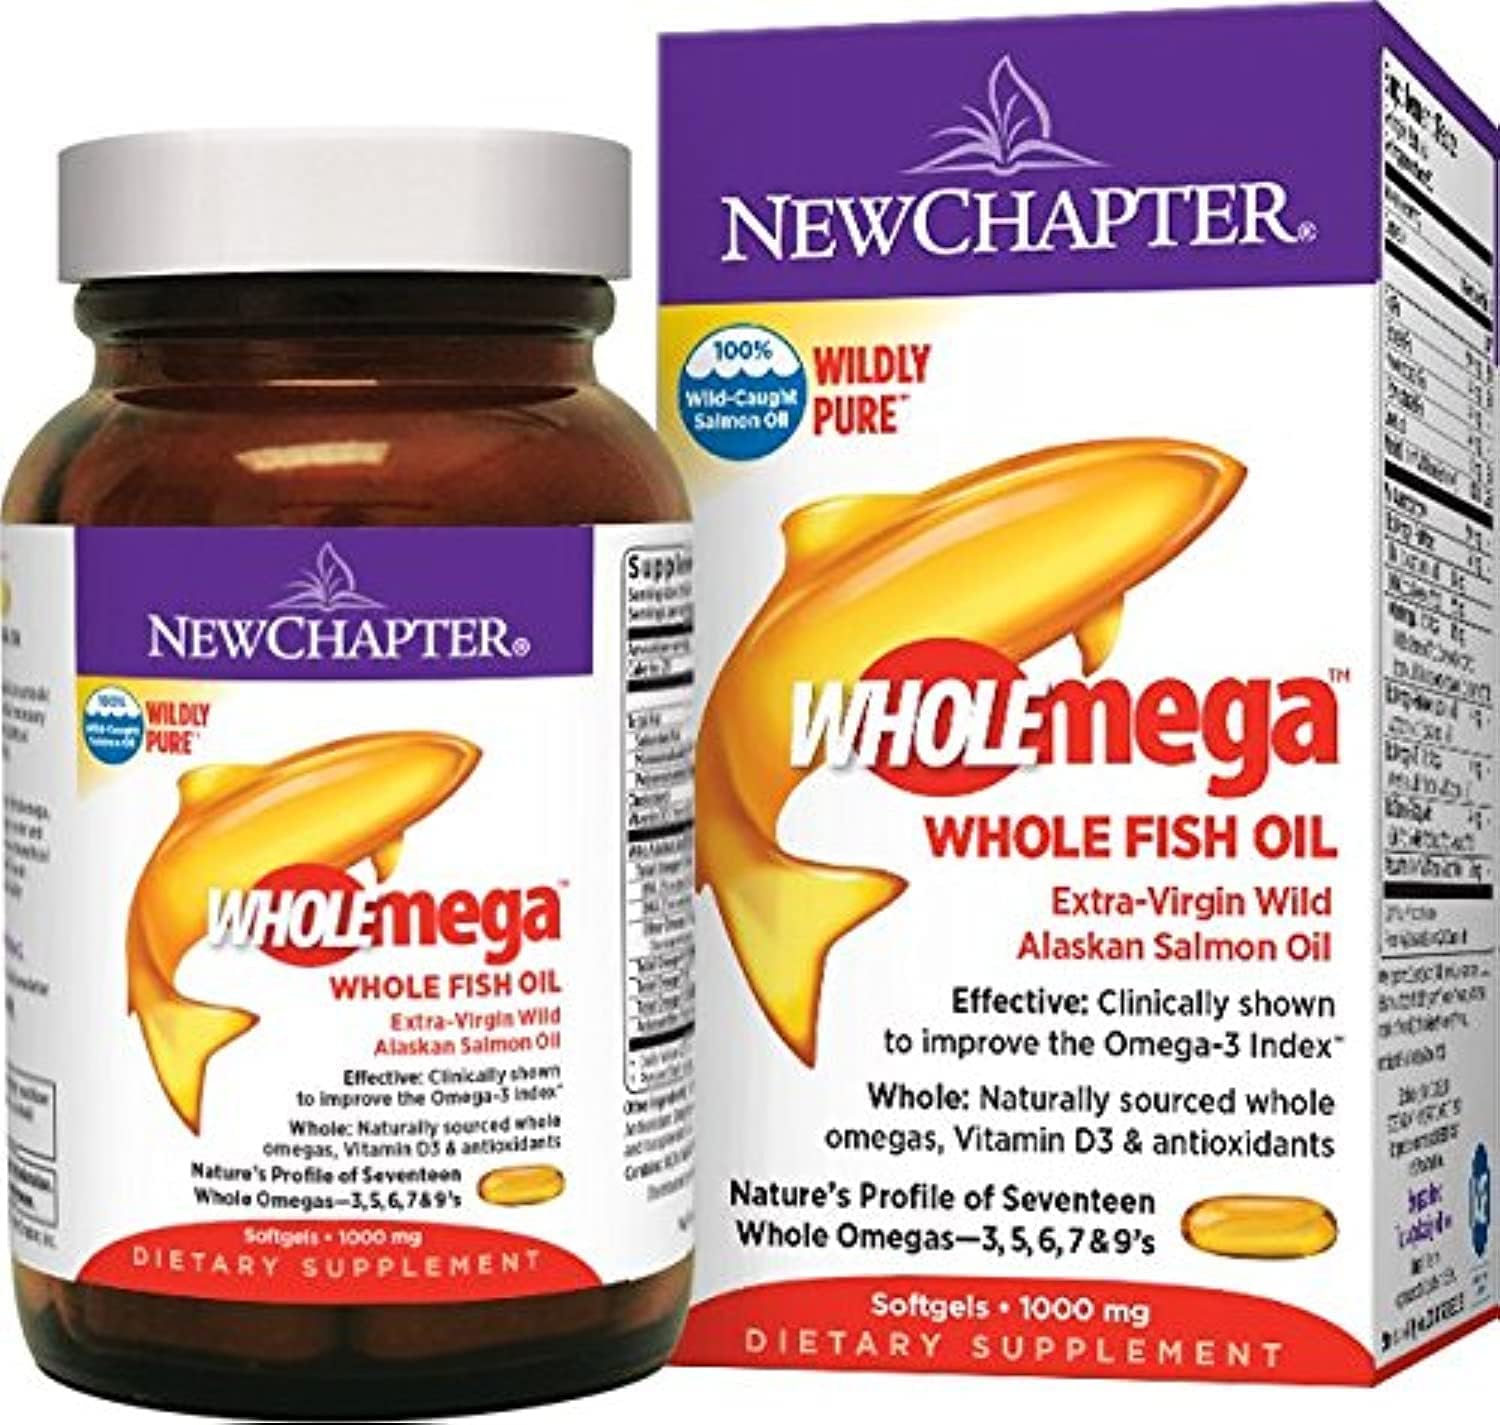 New Chapter WHOLEmega Whole Fish Oil 1000mg 60 Softgels  (Dietary Supplement)